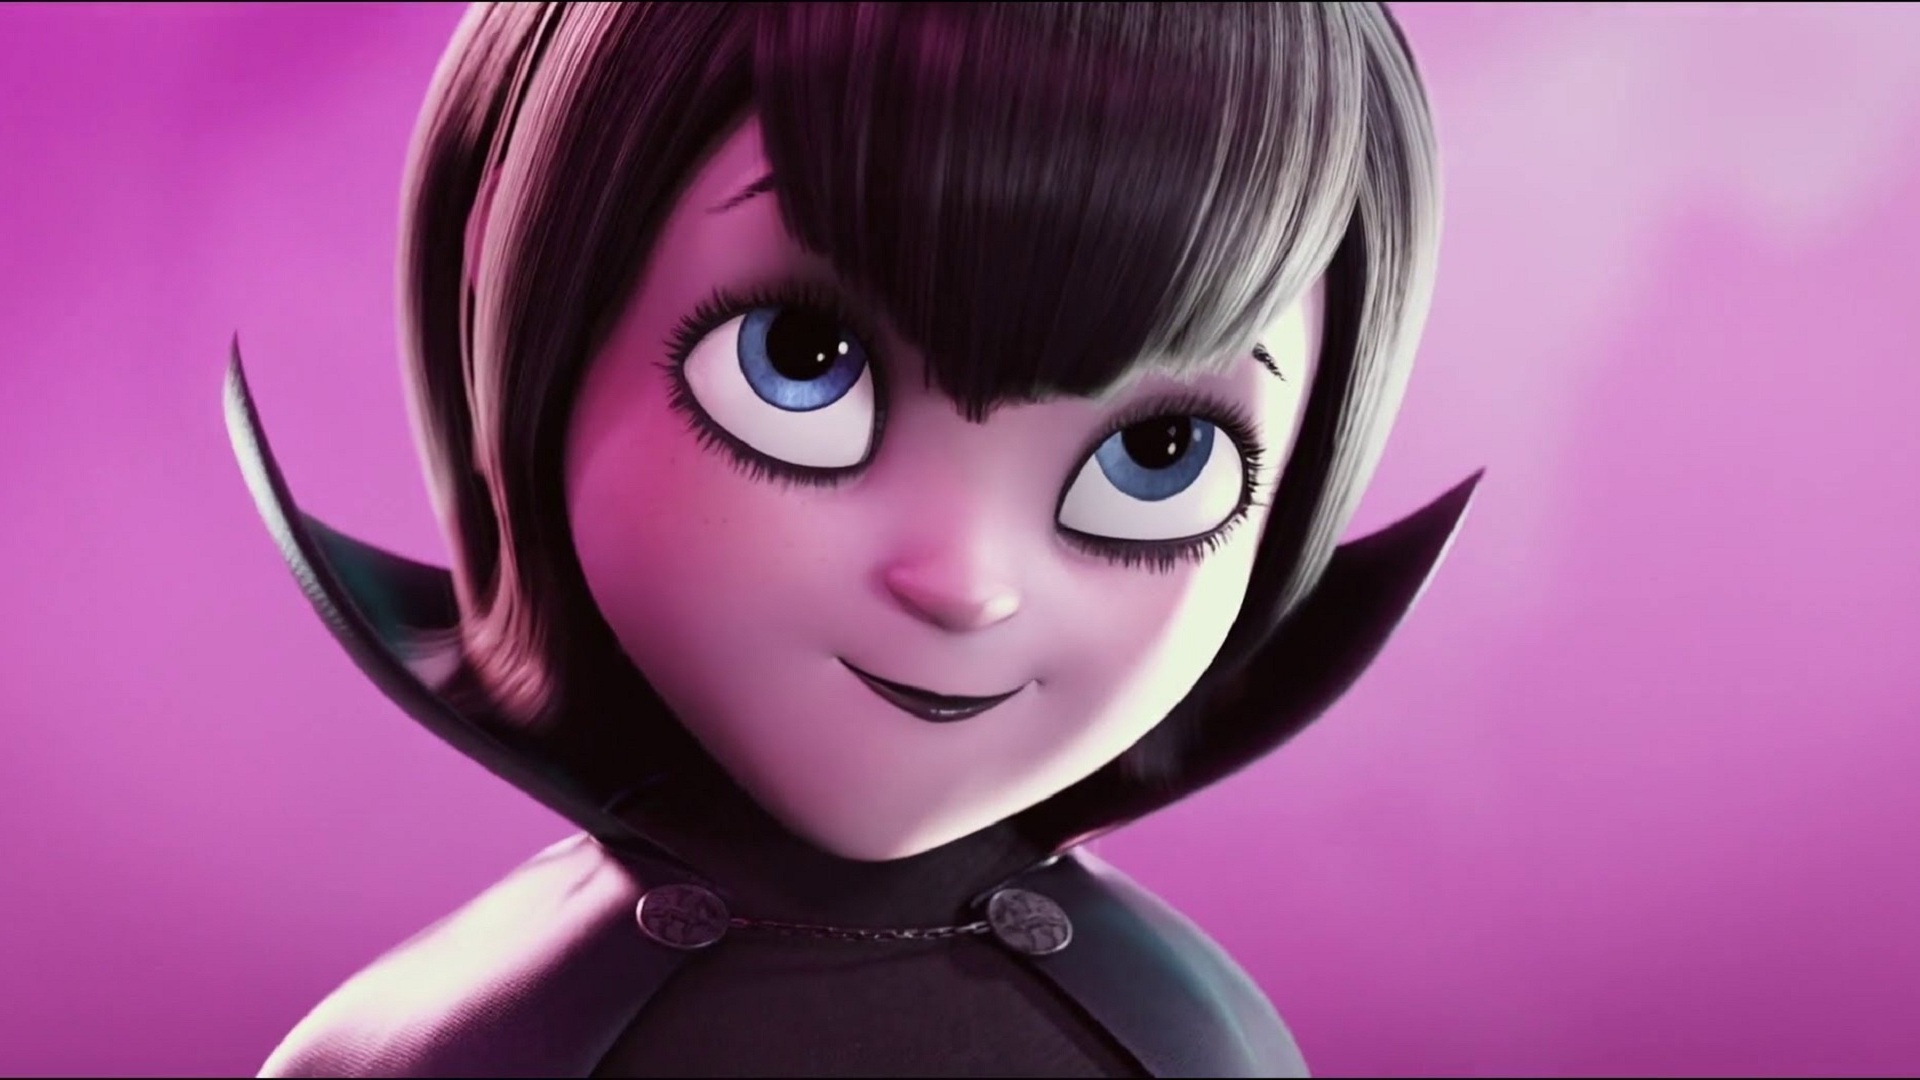 Hotel Transylvania characters, Animated comedy, CanadianGuy12's tribute, Fun movie, 1920x1080 Full HD Desktop